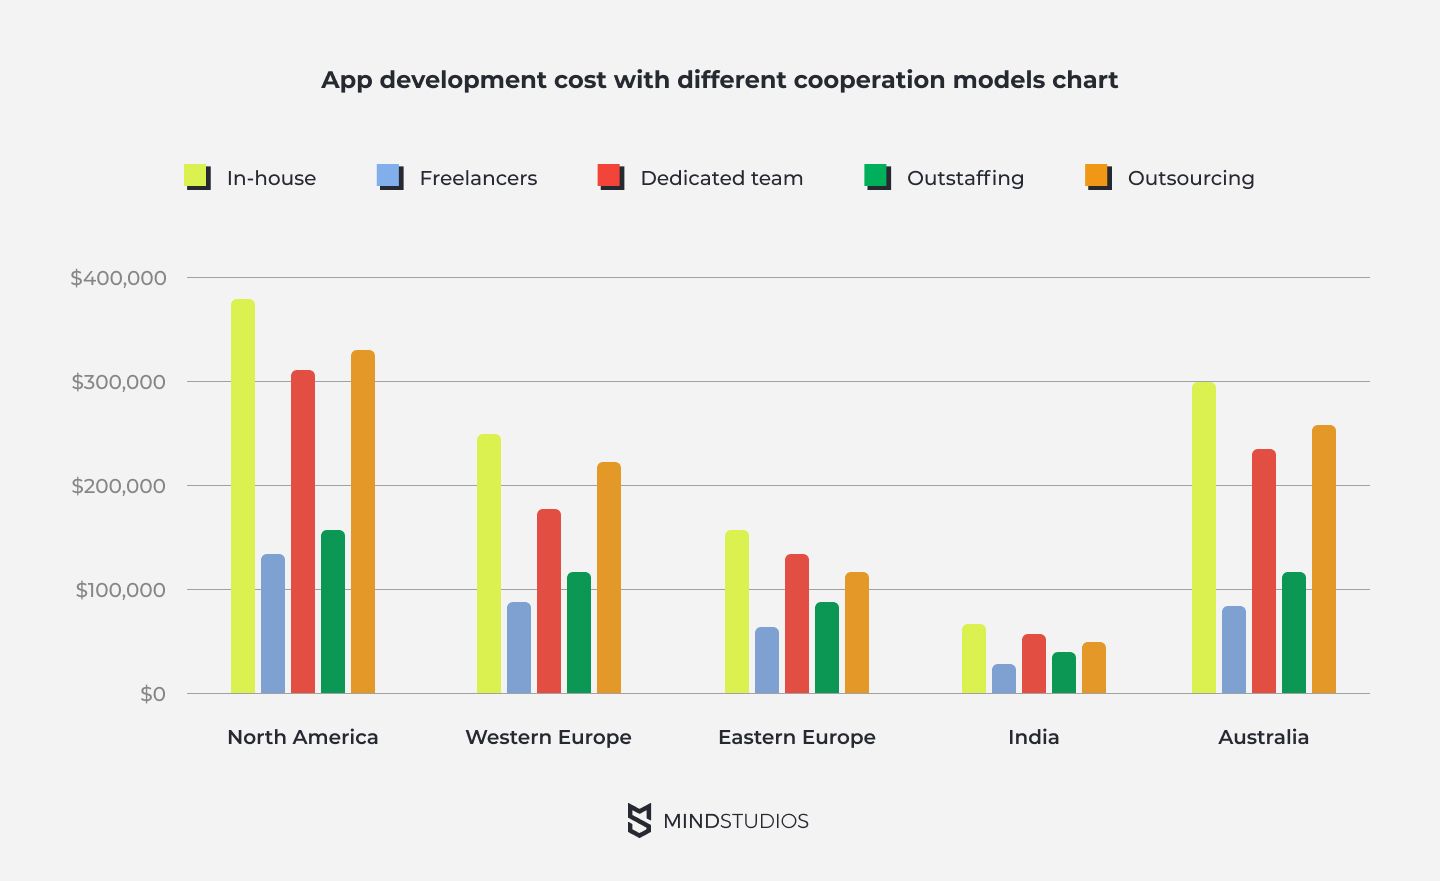 App development cost with different cooperation models